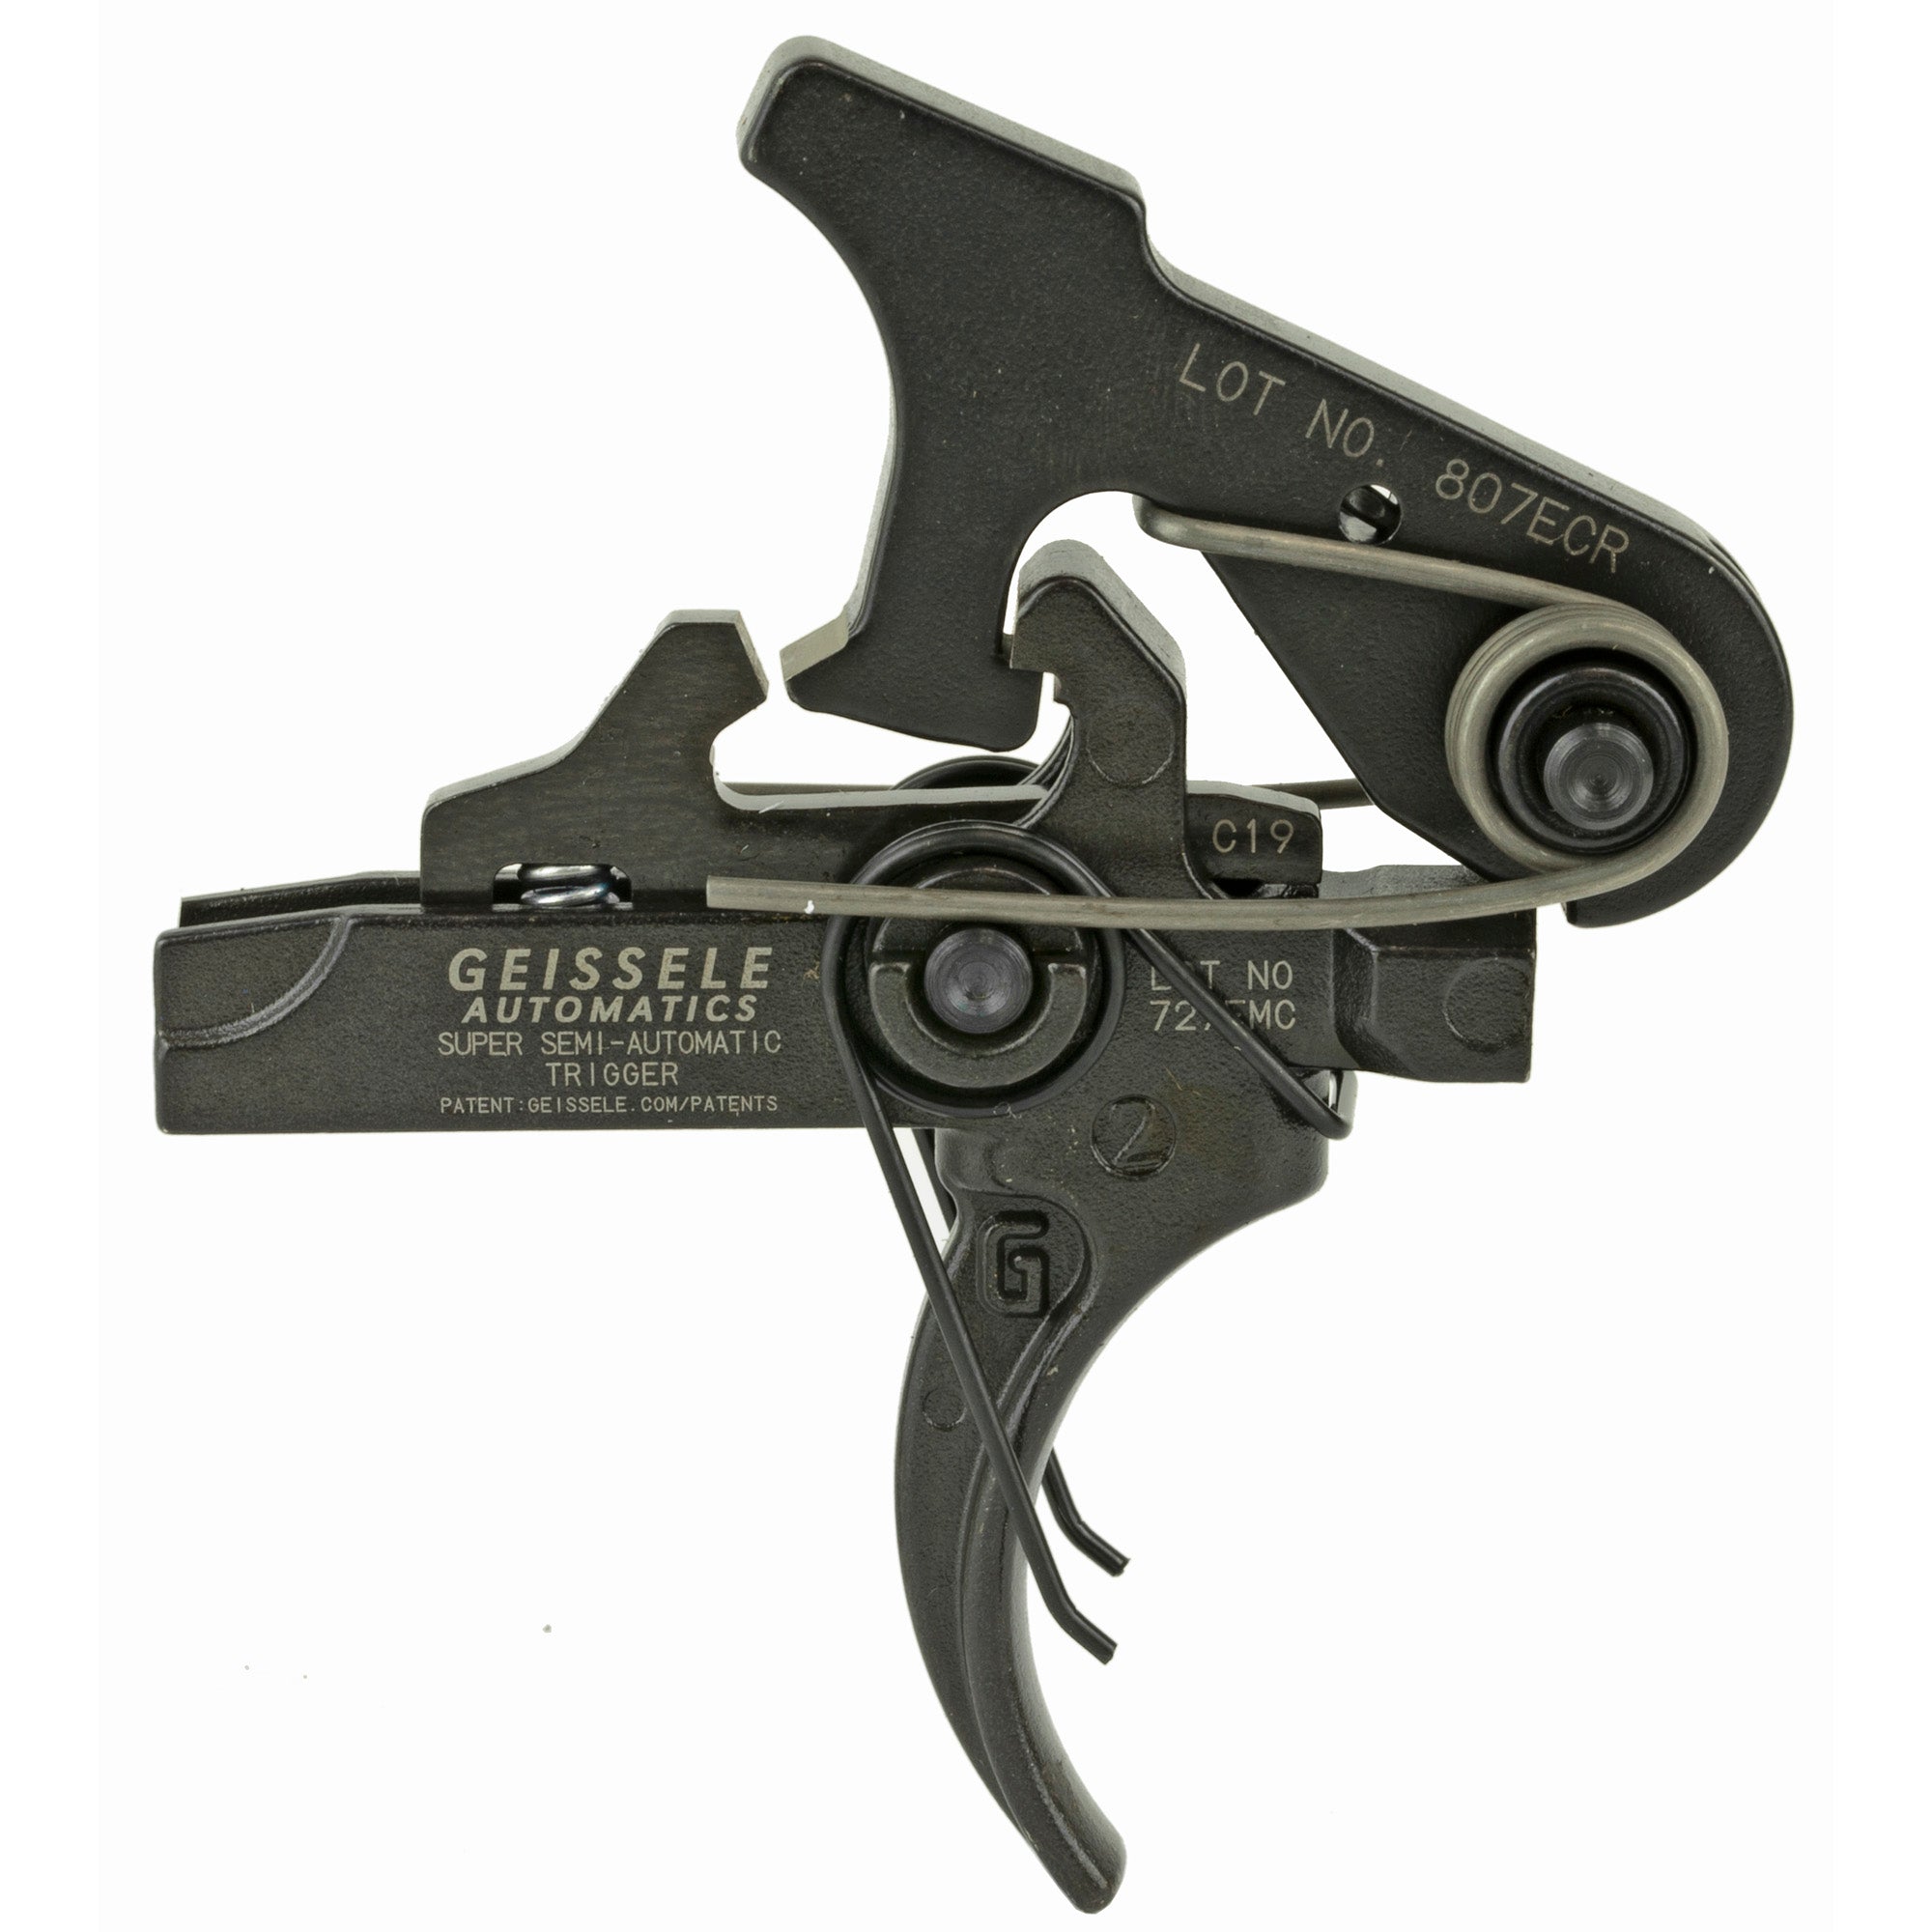 Geissele SSA 2-Stage Trigger, showcasing its durable design and precise pull mechanism for enhanced firearm control and accuracy.